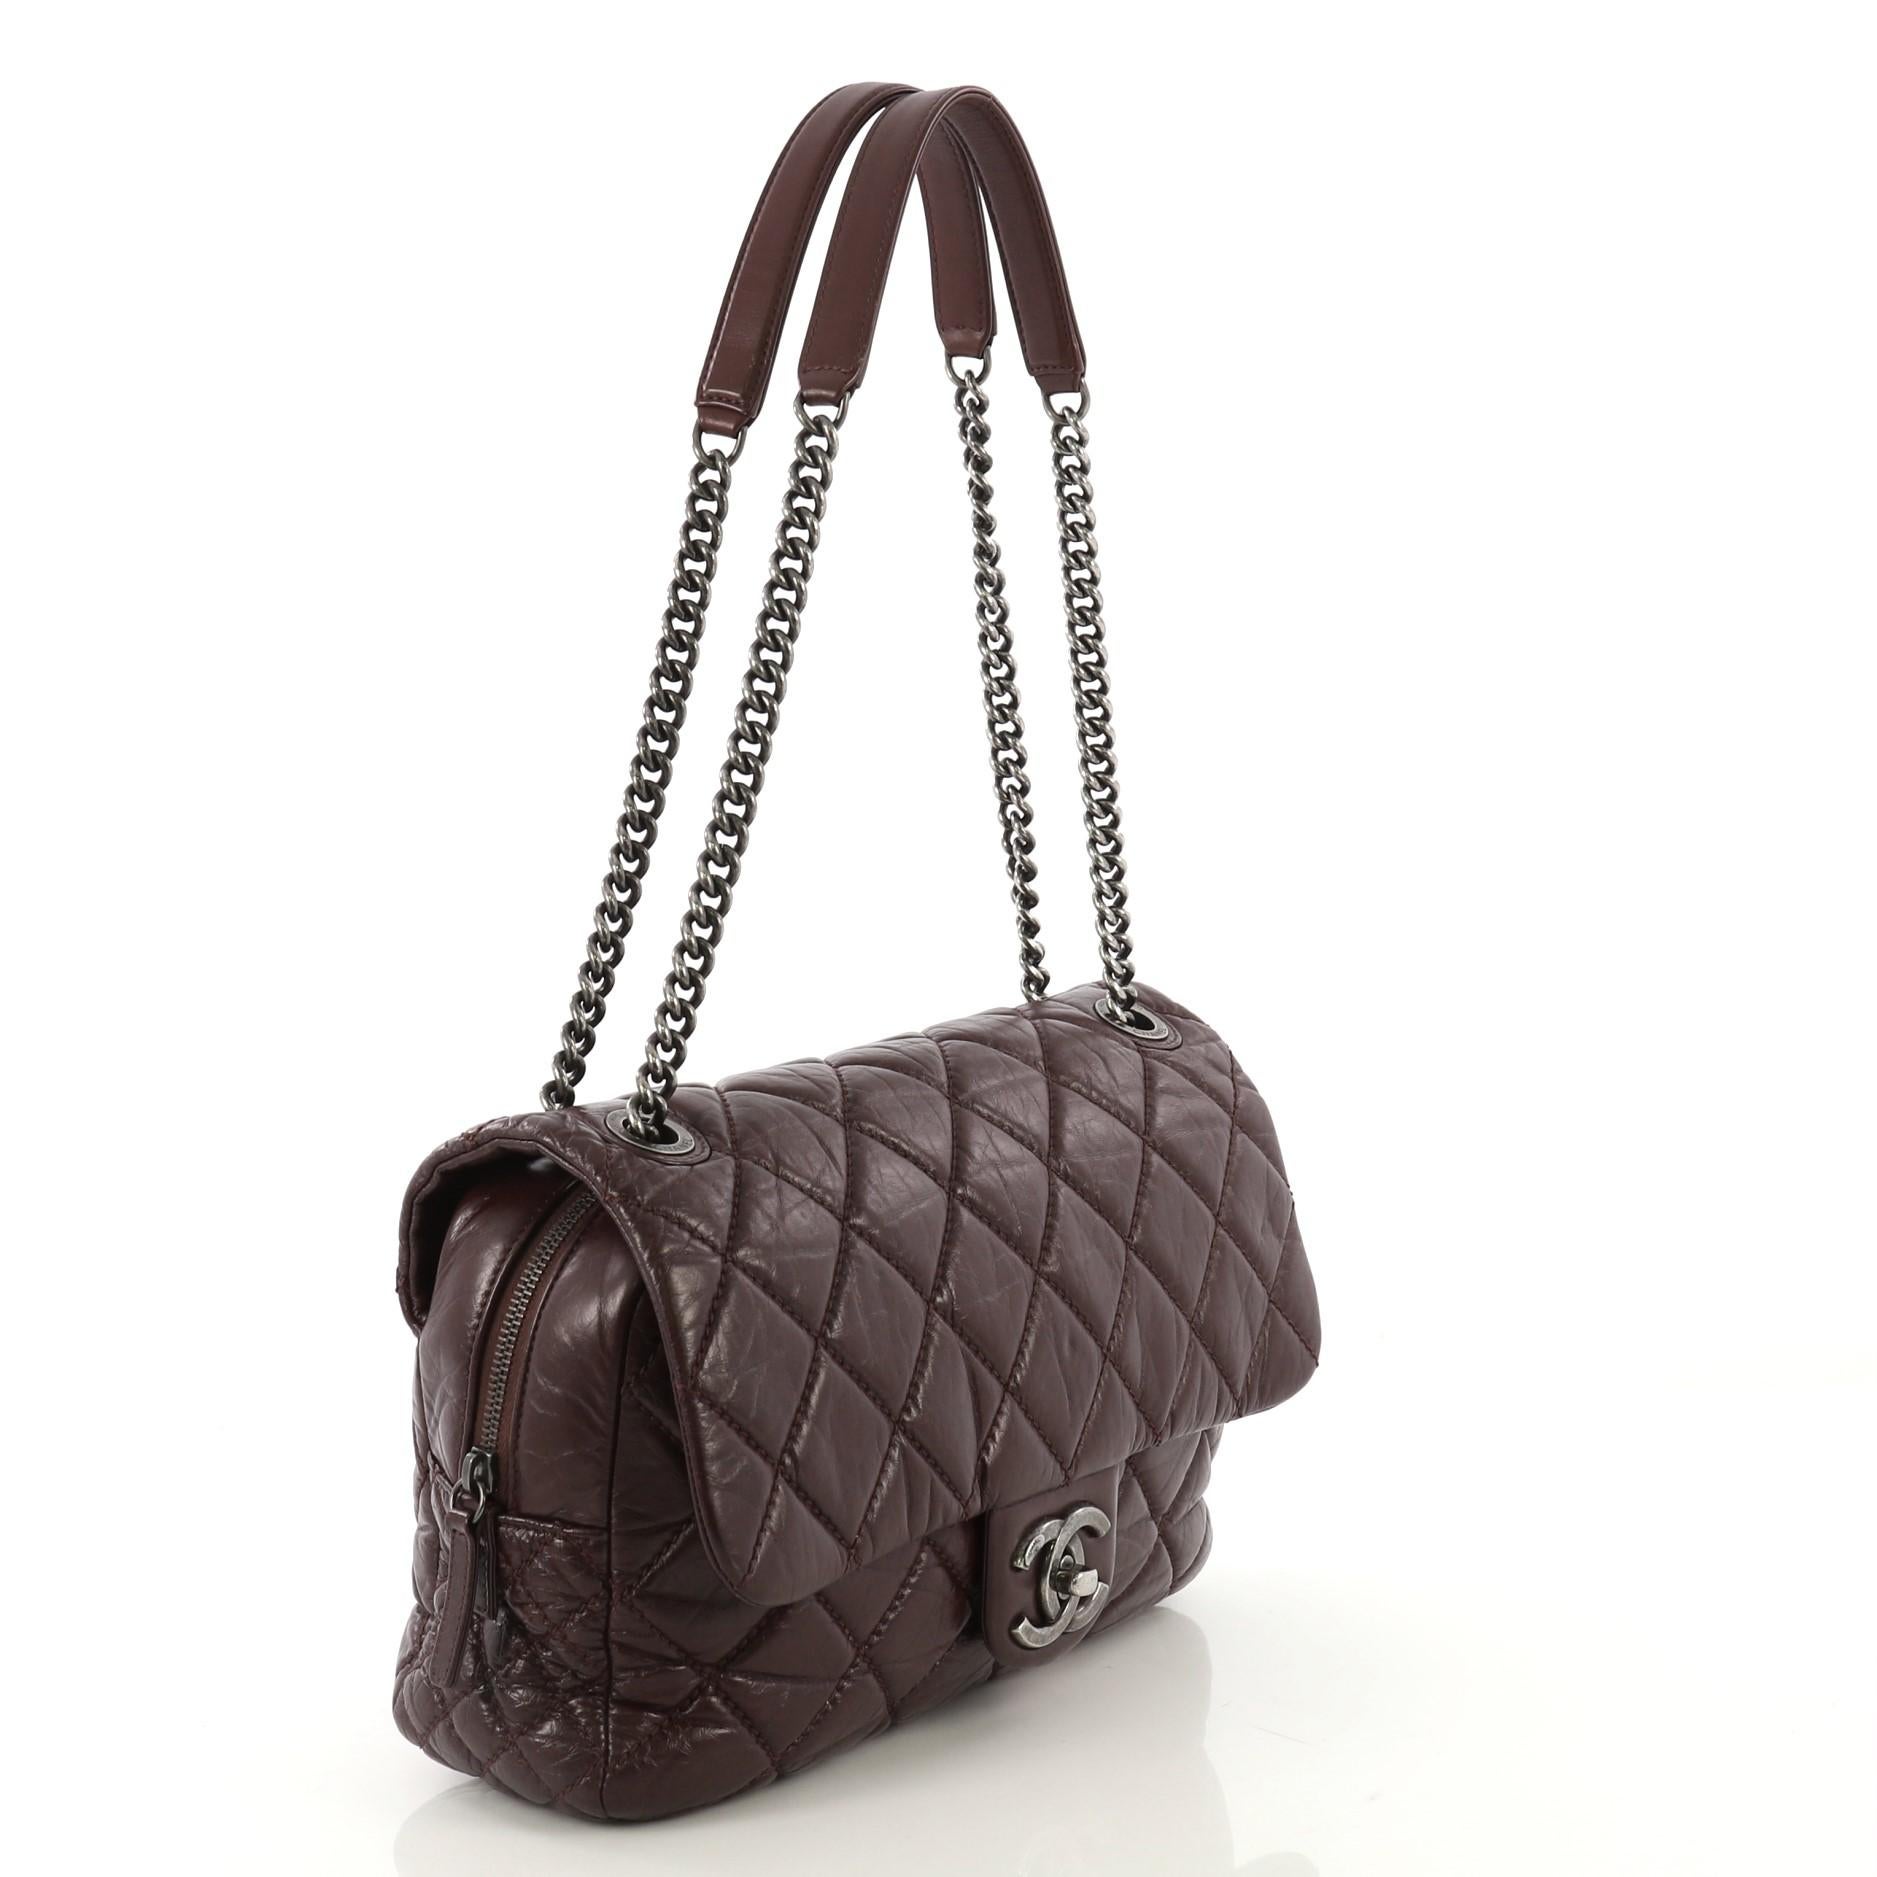 This Chanel Portobello Flap Bag Quilted Aged Calfskin Jumbo, crafted from burgundy quilted aged calfskin leather, features chain link straps with leather pads and aged silver-tone hardware. Its CC boy push-lock closure opens to a burgundy fabric